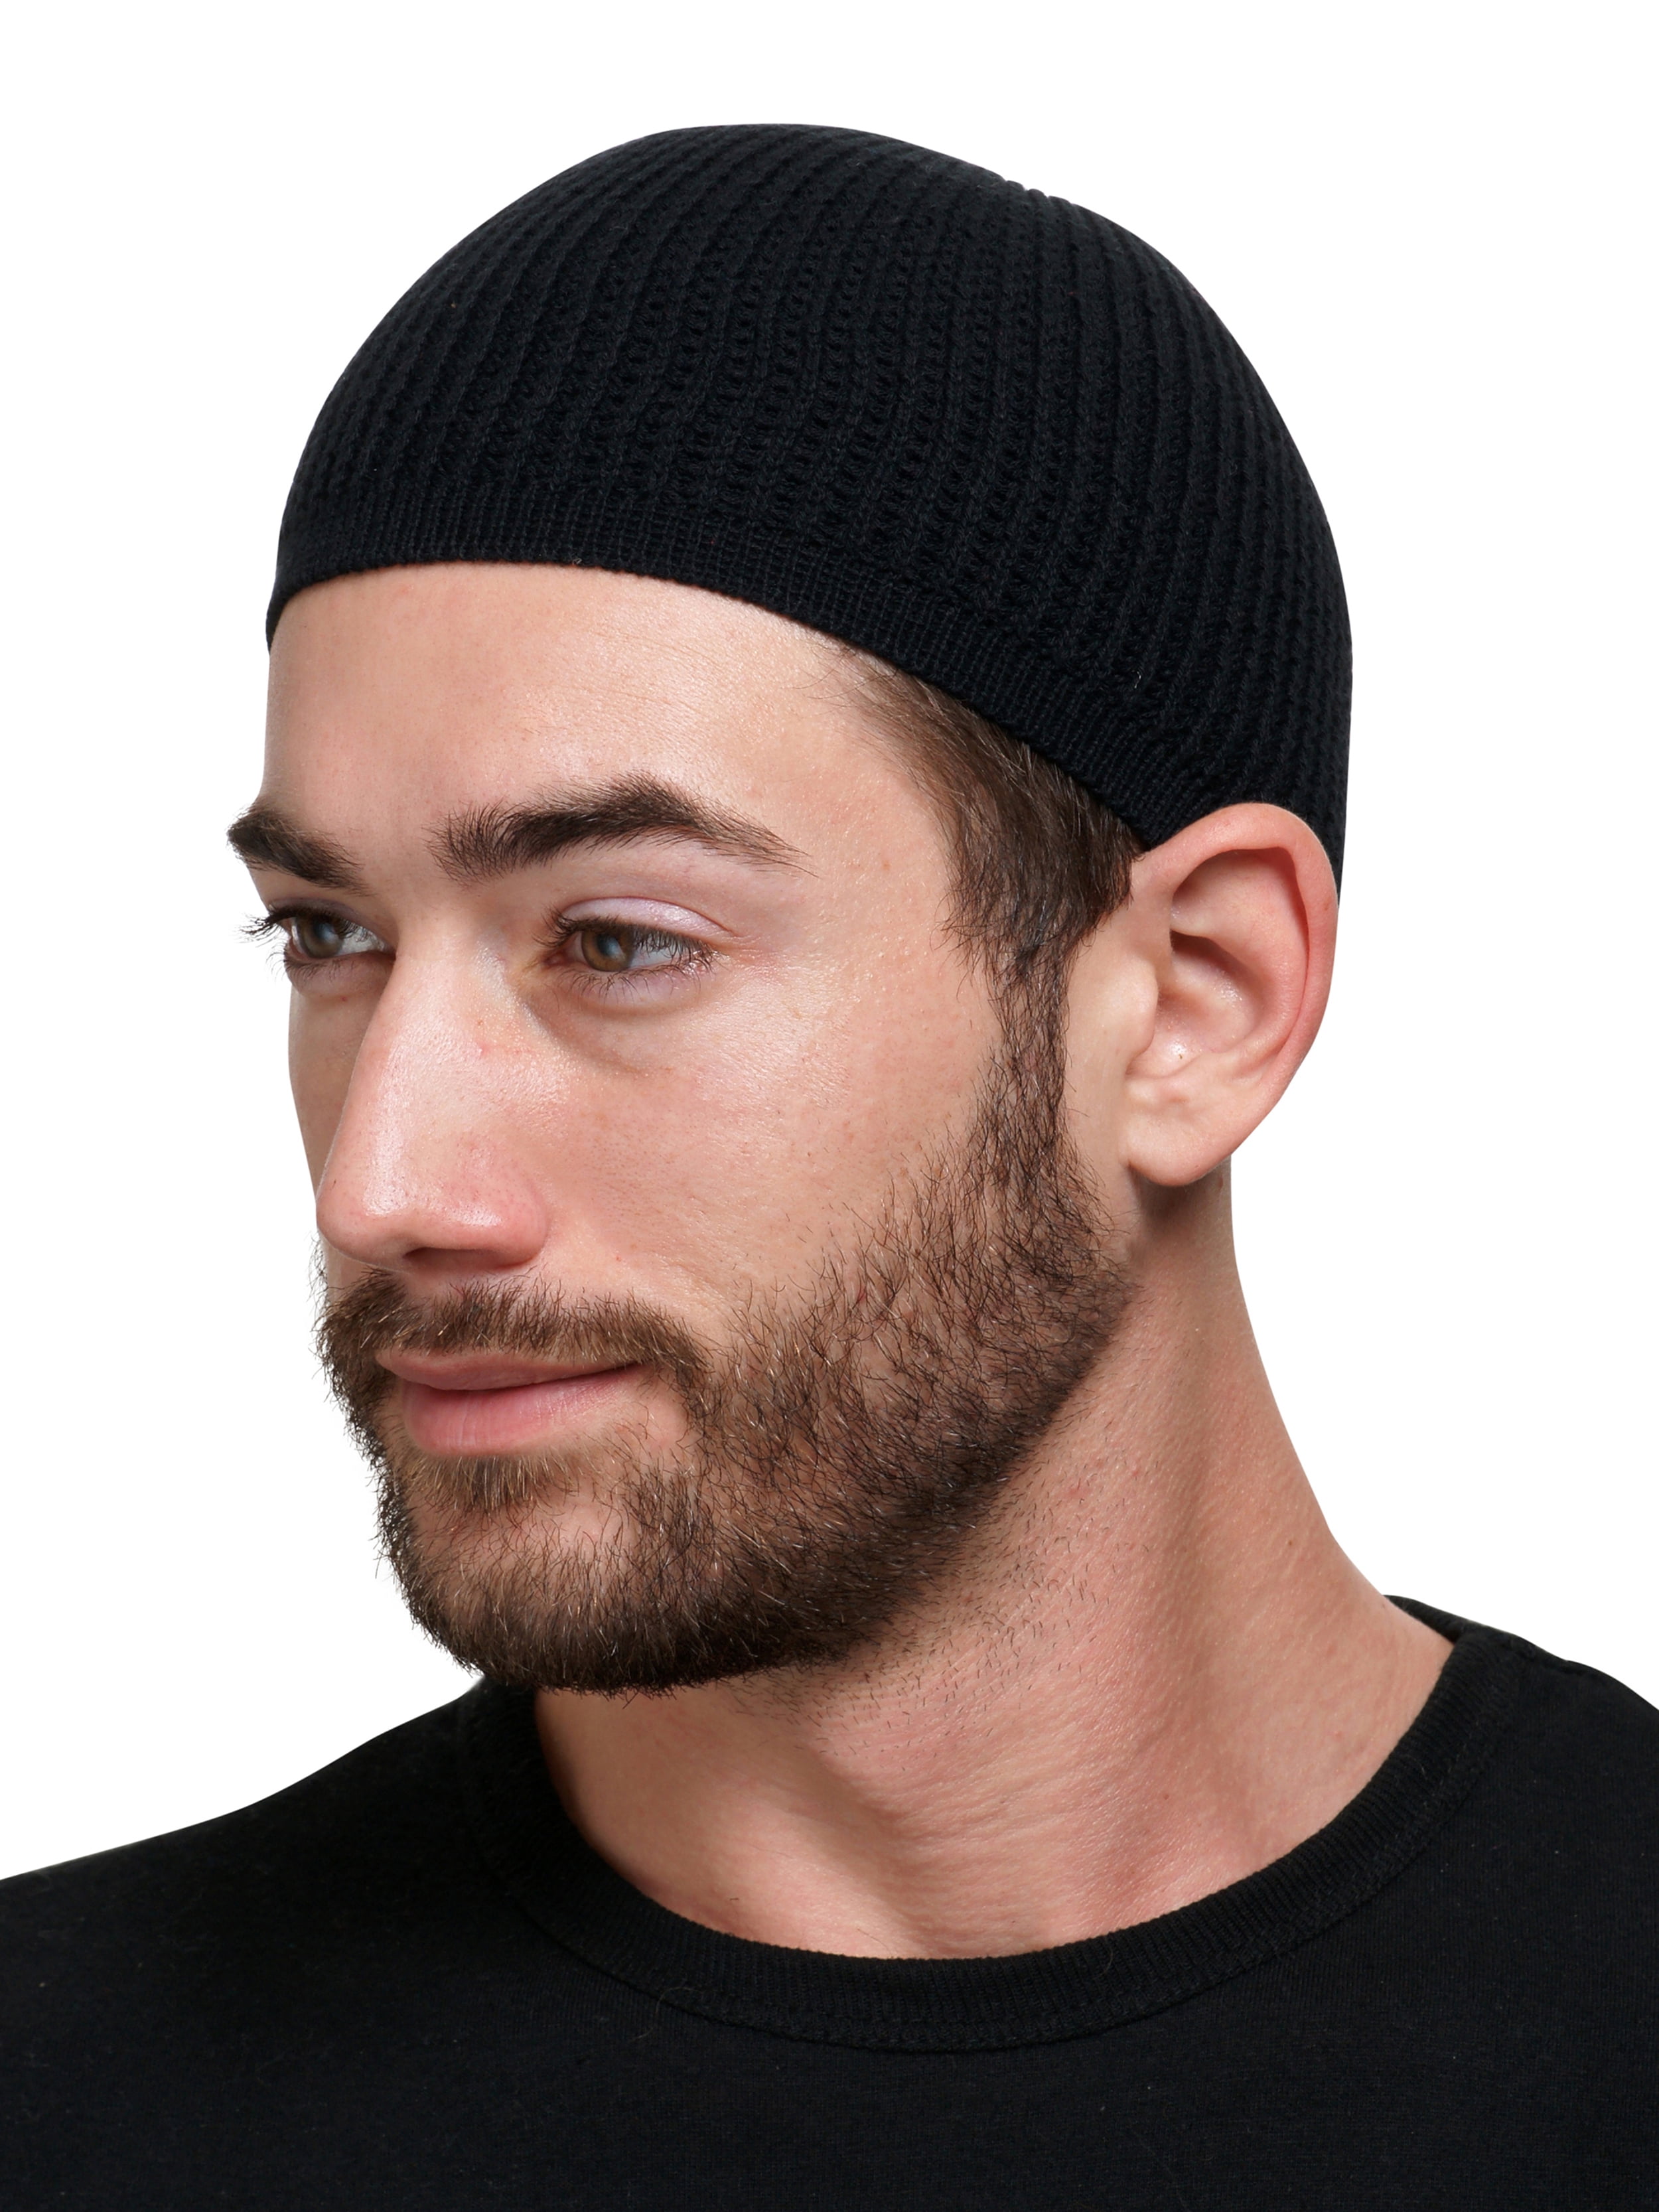 Candid Signature - Solid Colored Kufi Hat with Checkered Knit Adult Cap ...